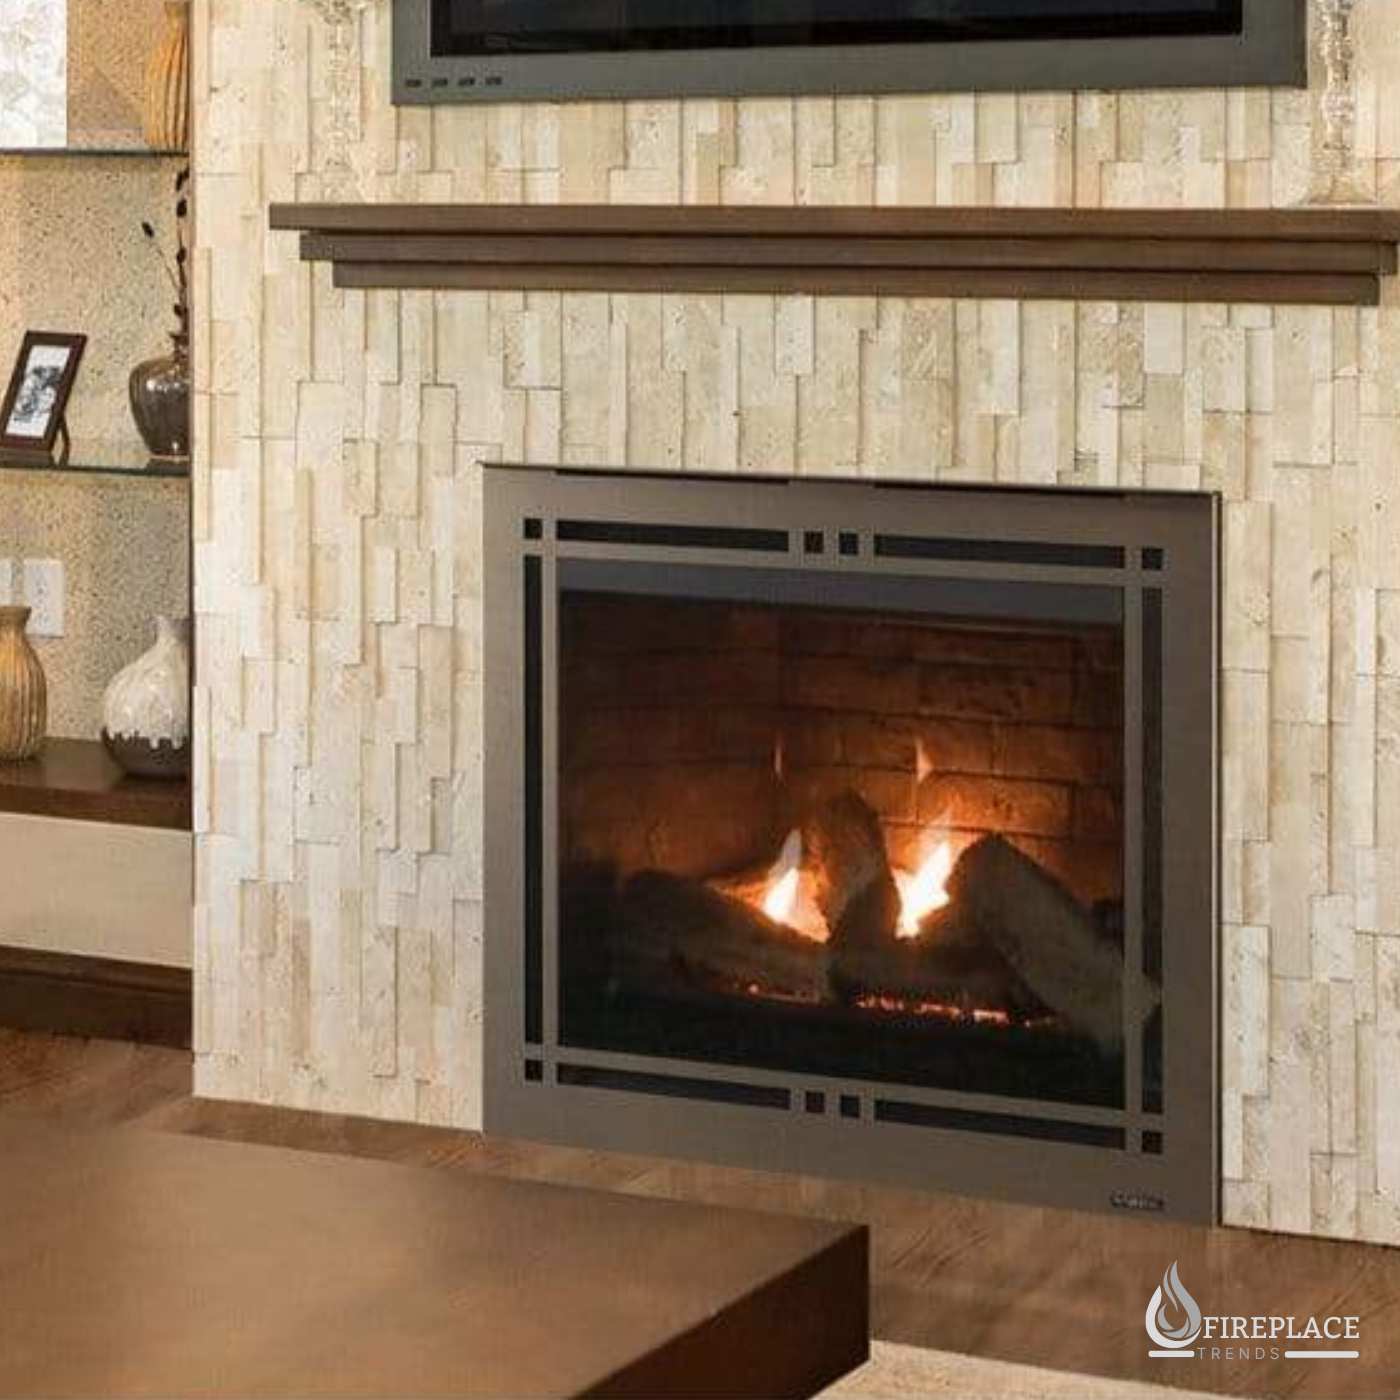 Majestic - Meridian 36 Direct Vent Traditional Gas Fireplace with Intellifire Touch Ignition